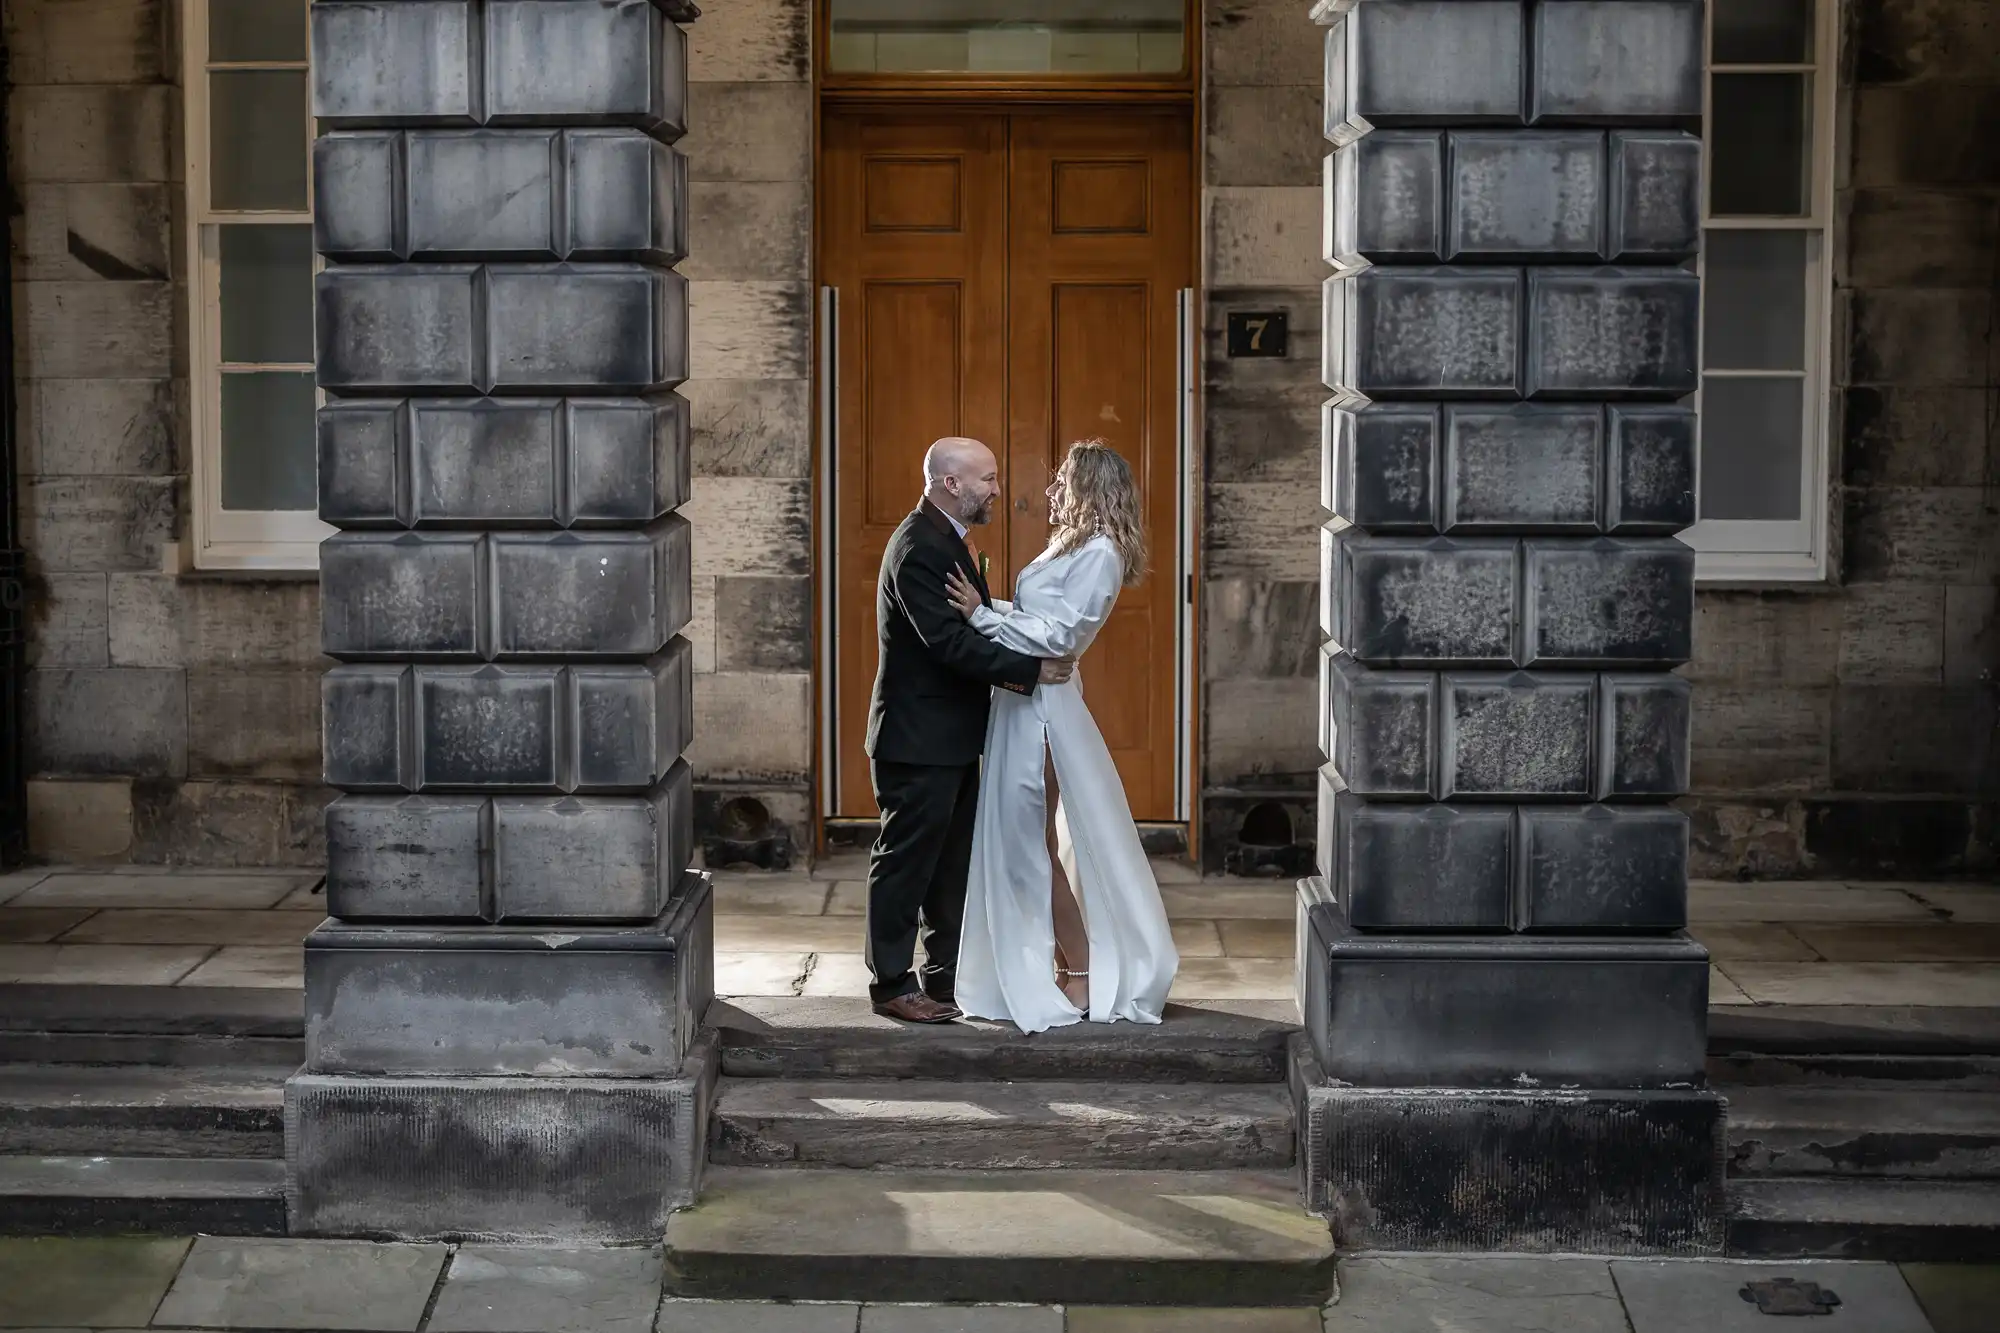 A couple stands facing each other, embrace, and smile between two stone pillars in front of a wooden door. The man wears a suit, and the woman is dressed in a long white outfit.